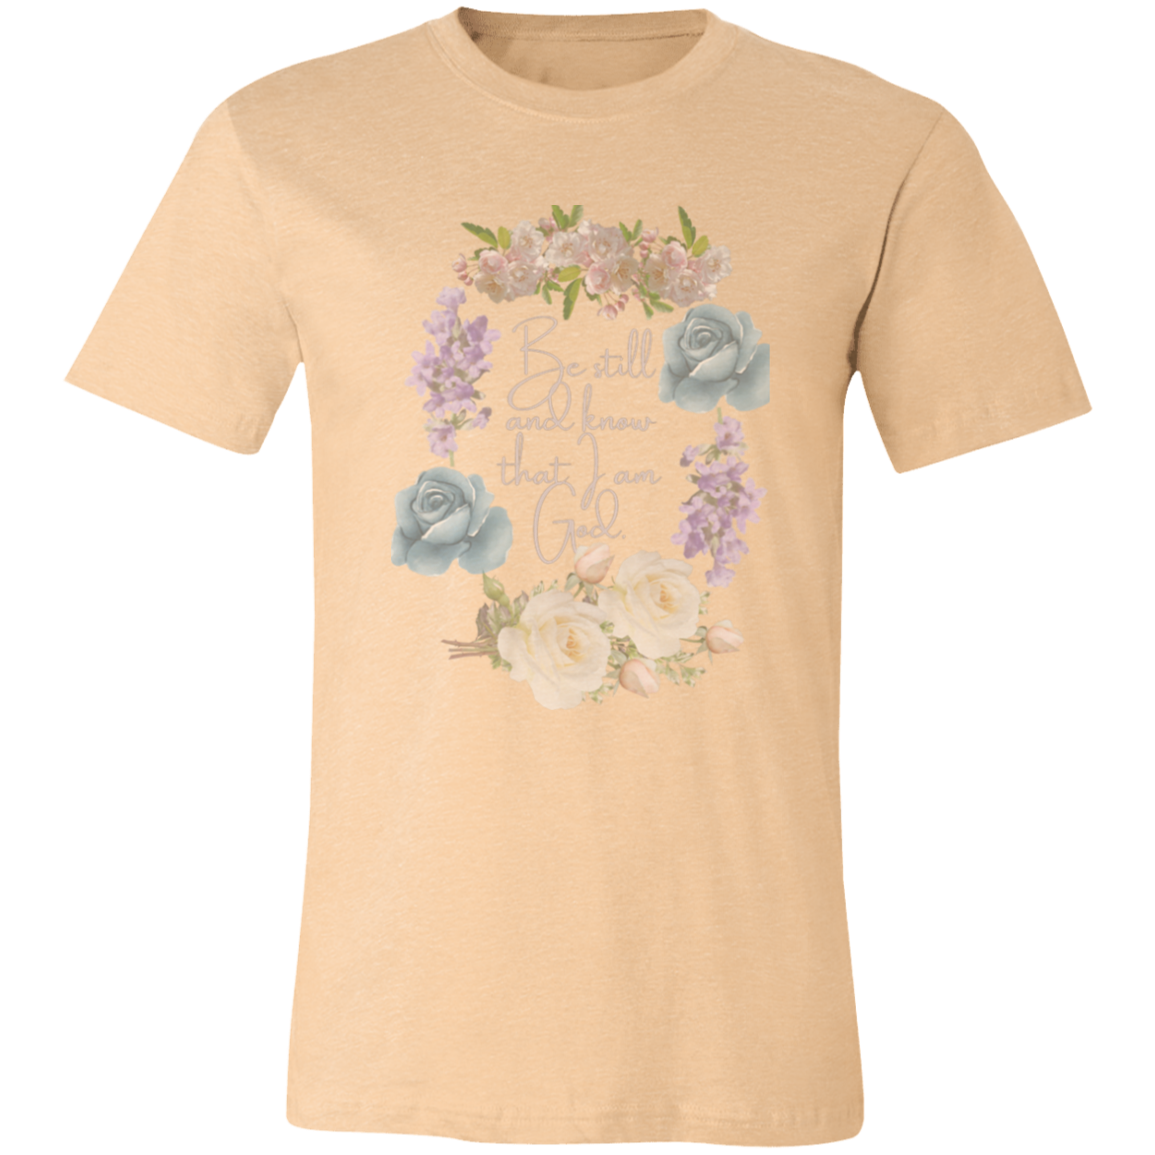 Be Still and Know Jersey Short-Sleeve T-Shirt